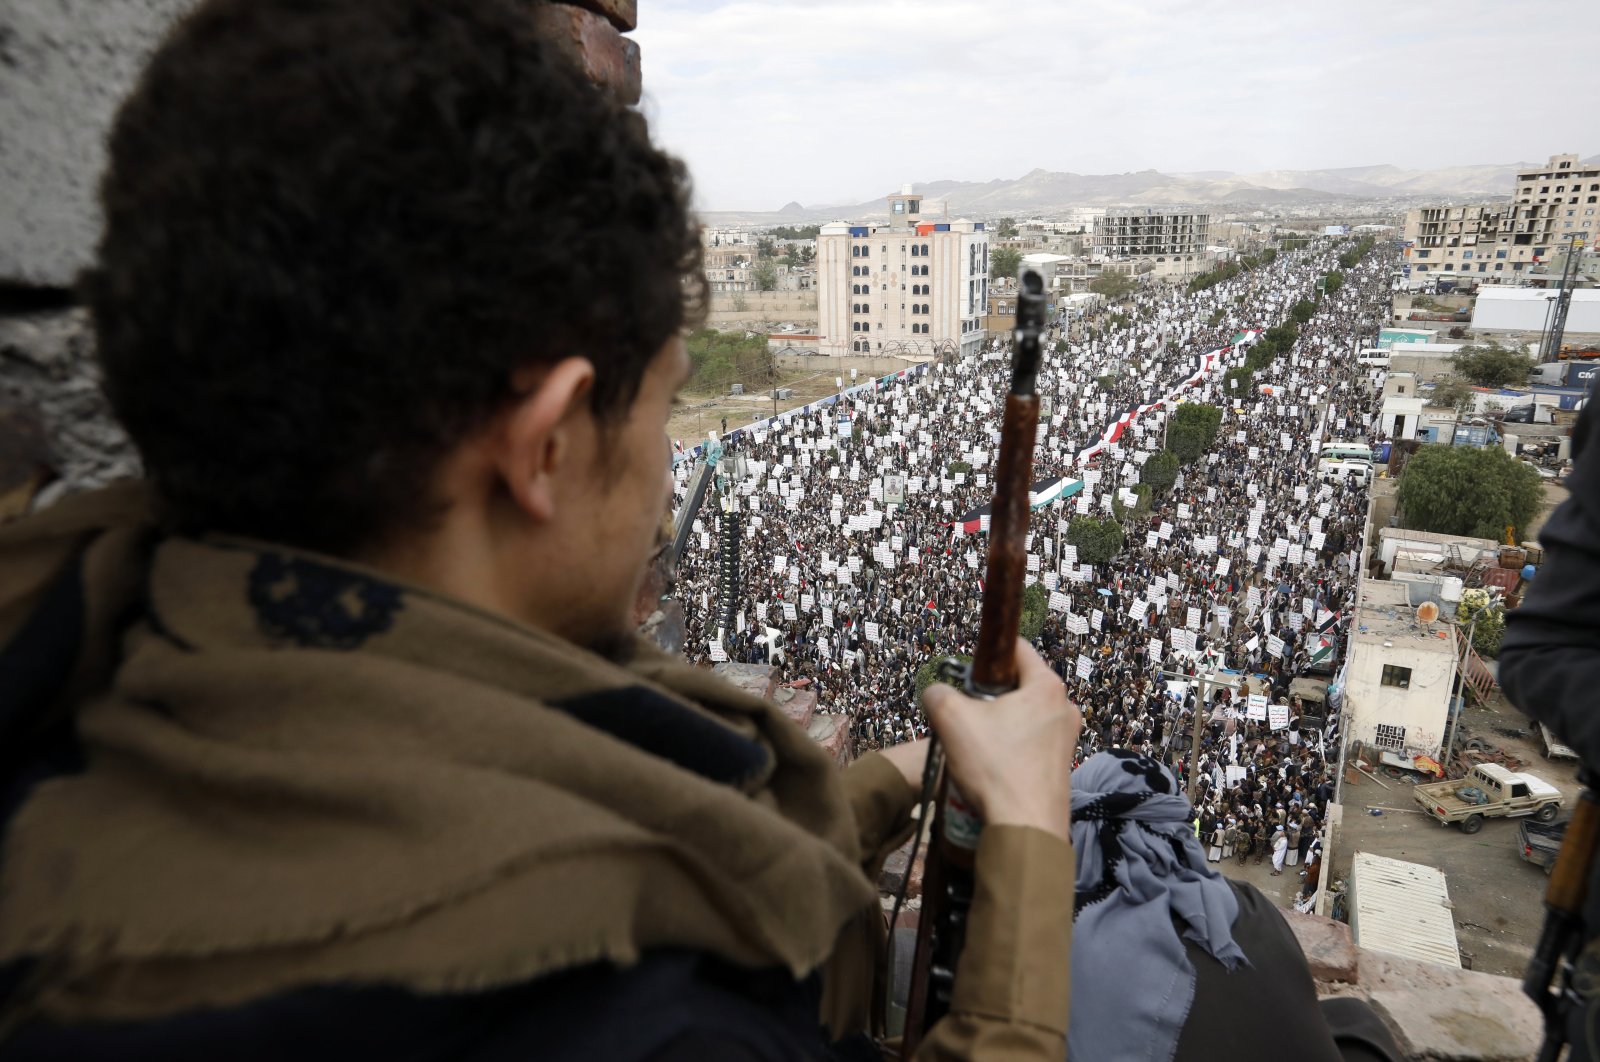 An armed Houthi fighter keeps watch as Houthi supporters attend a rally marking Al-Quds Day (Jerusalem Day) on the last Friday of the Muslim fasting month of Ramadan, Sanaa, Yemen, May 7, 2021. (EPA Photo)